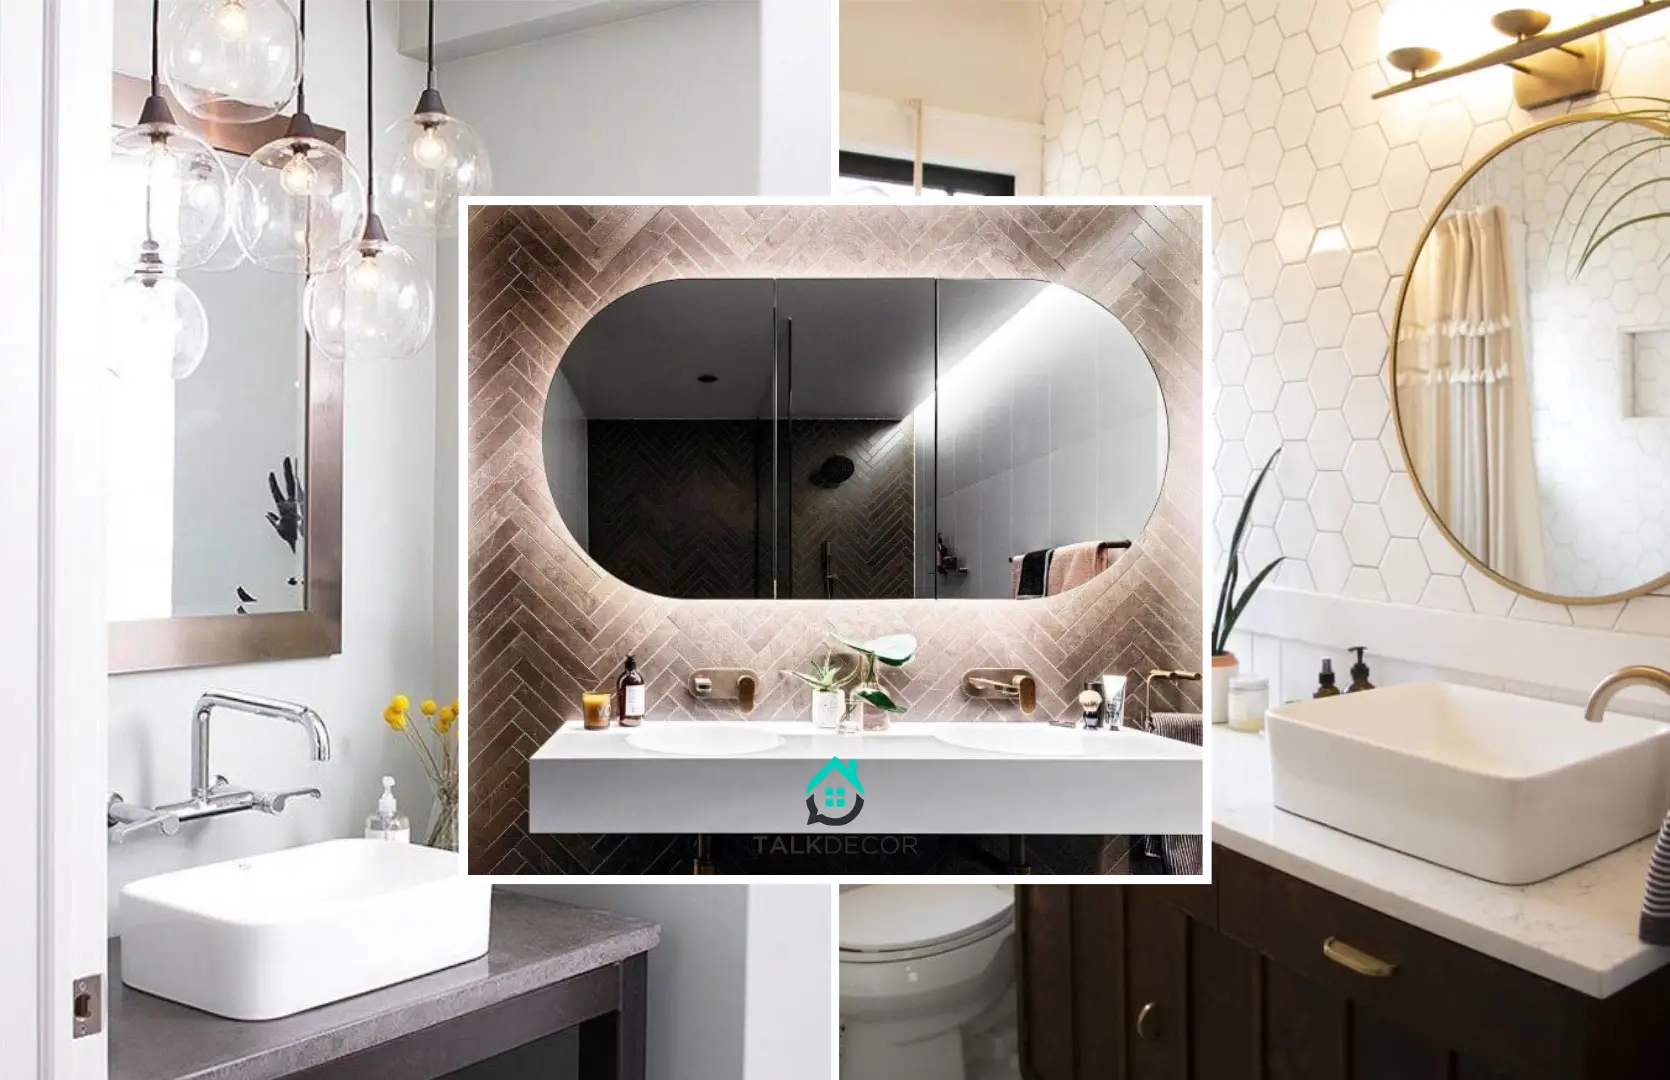 Be Elegant and Classy with These Lighting fixtures for Bathroom Vanity Ideas